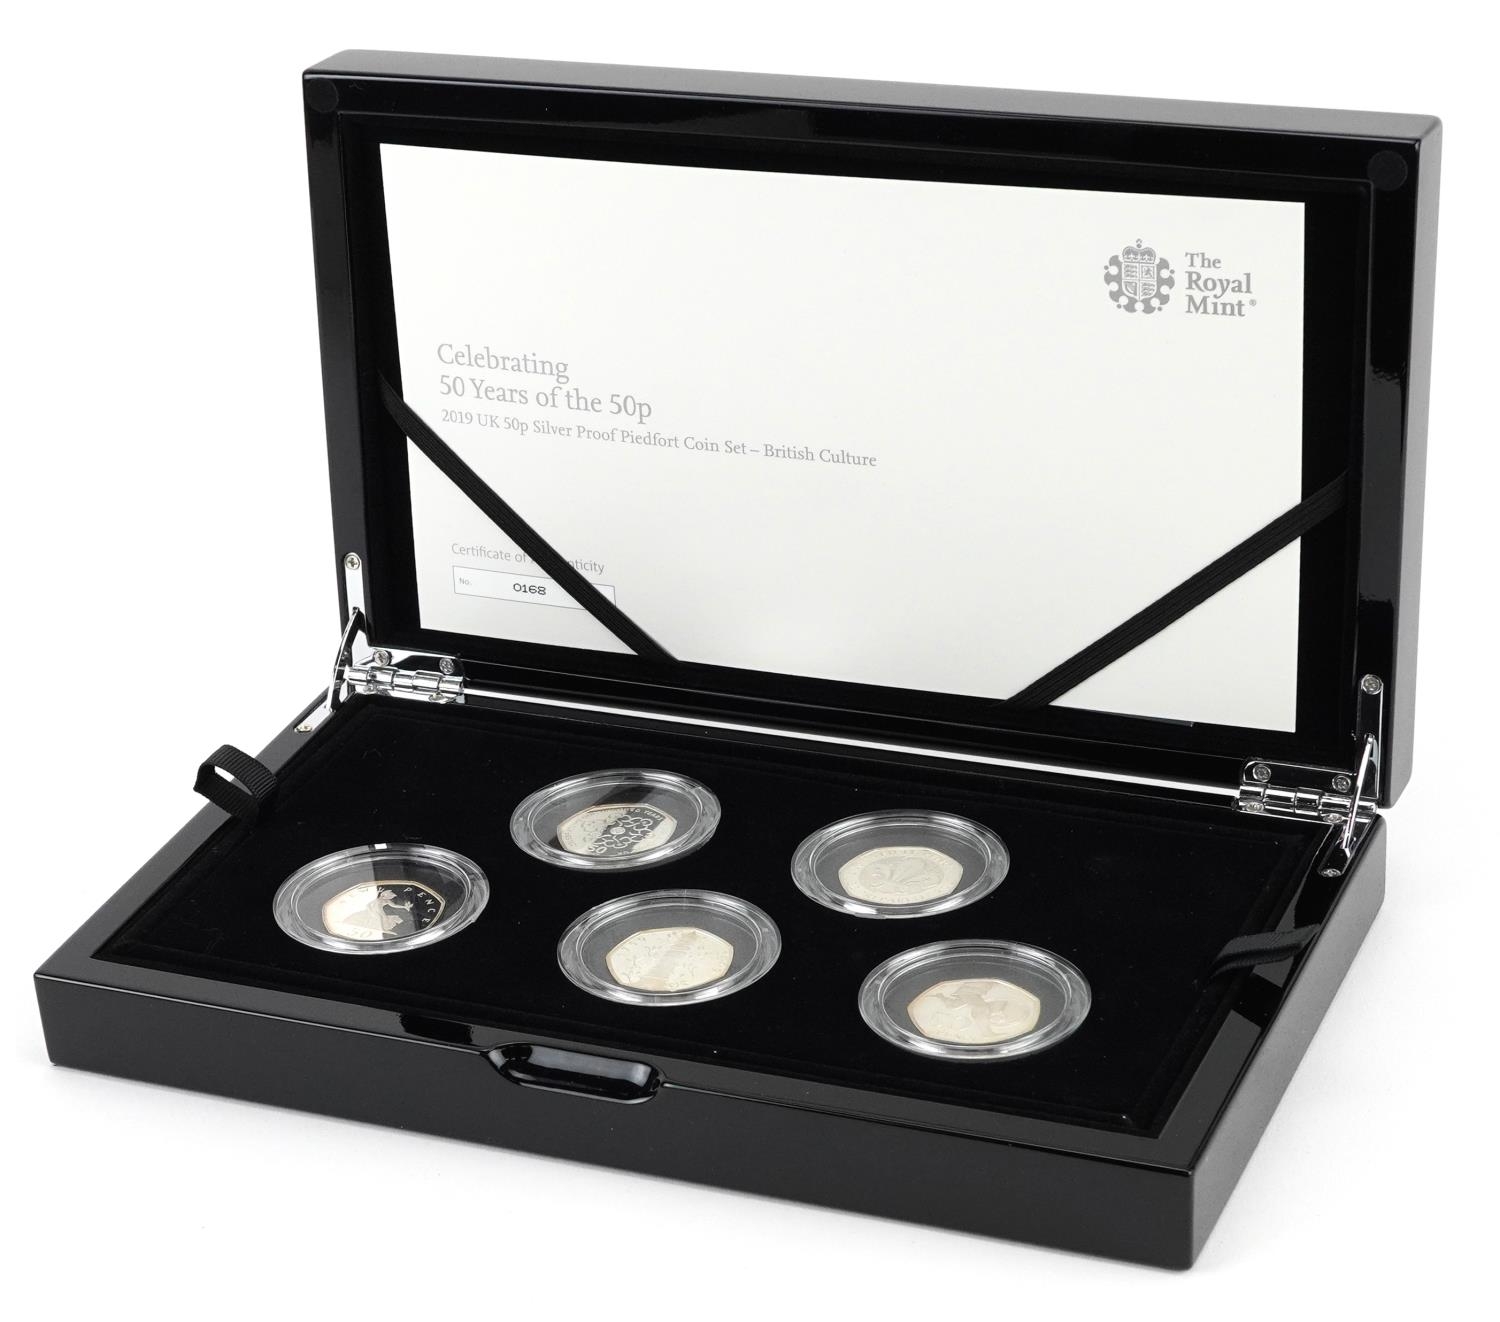 Elizabeth II 2019 United Kingdom fifty pence silver proof piedfort coin set, British Culture - Image 2 of 4